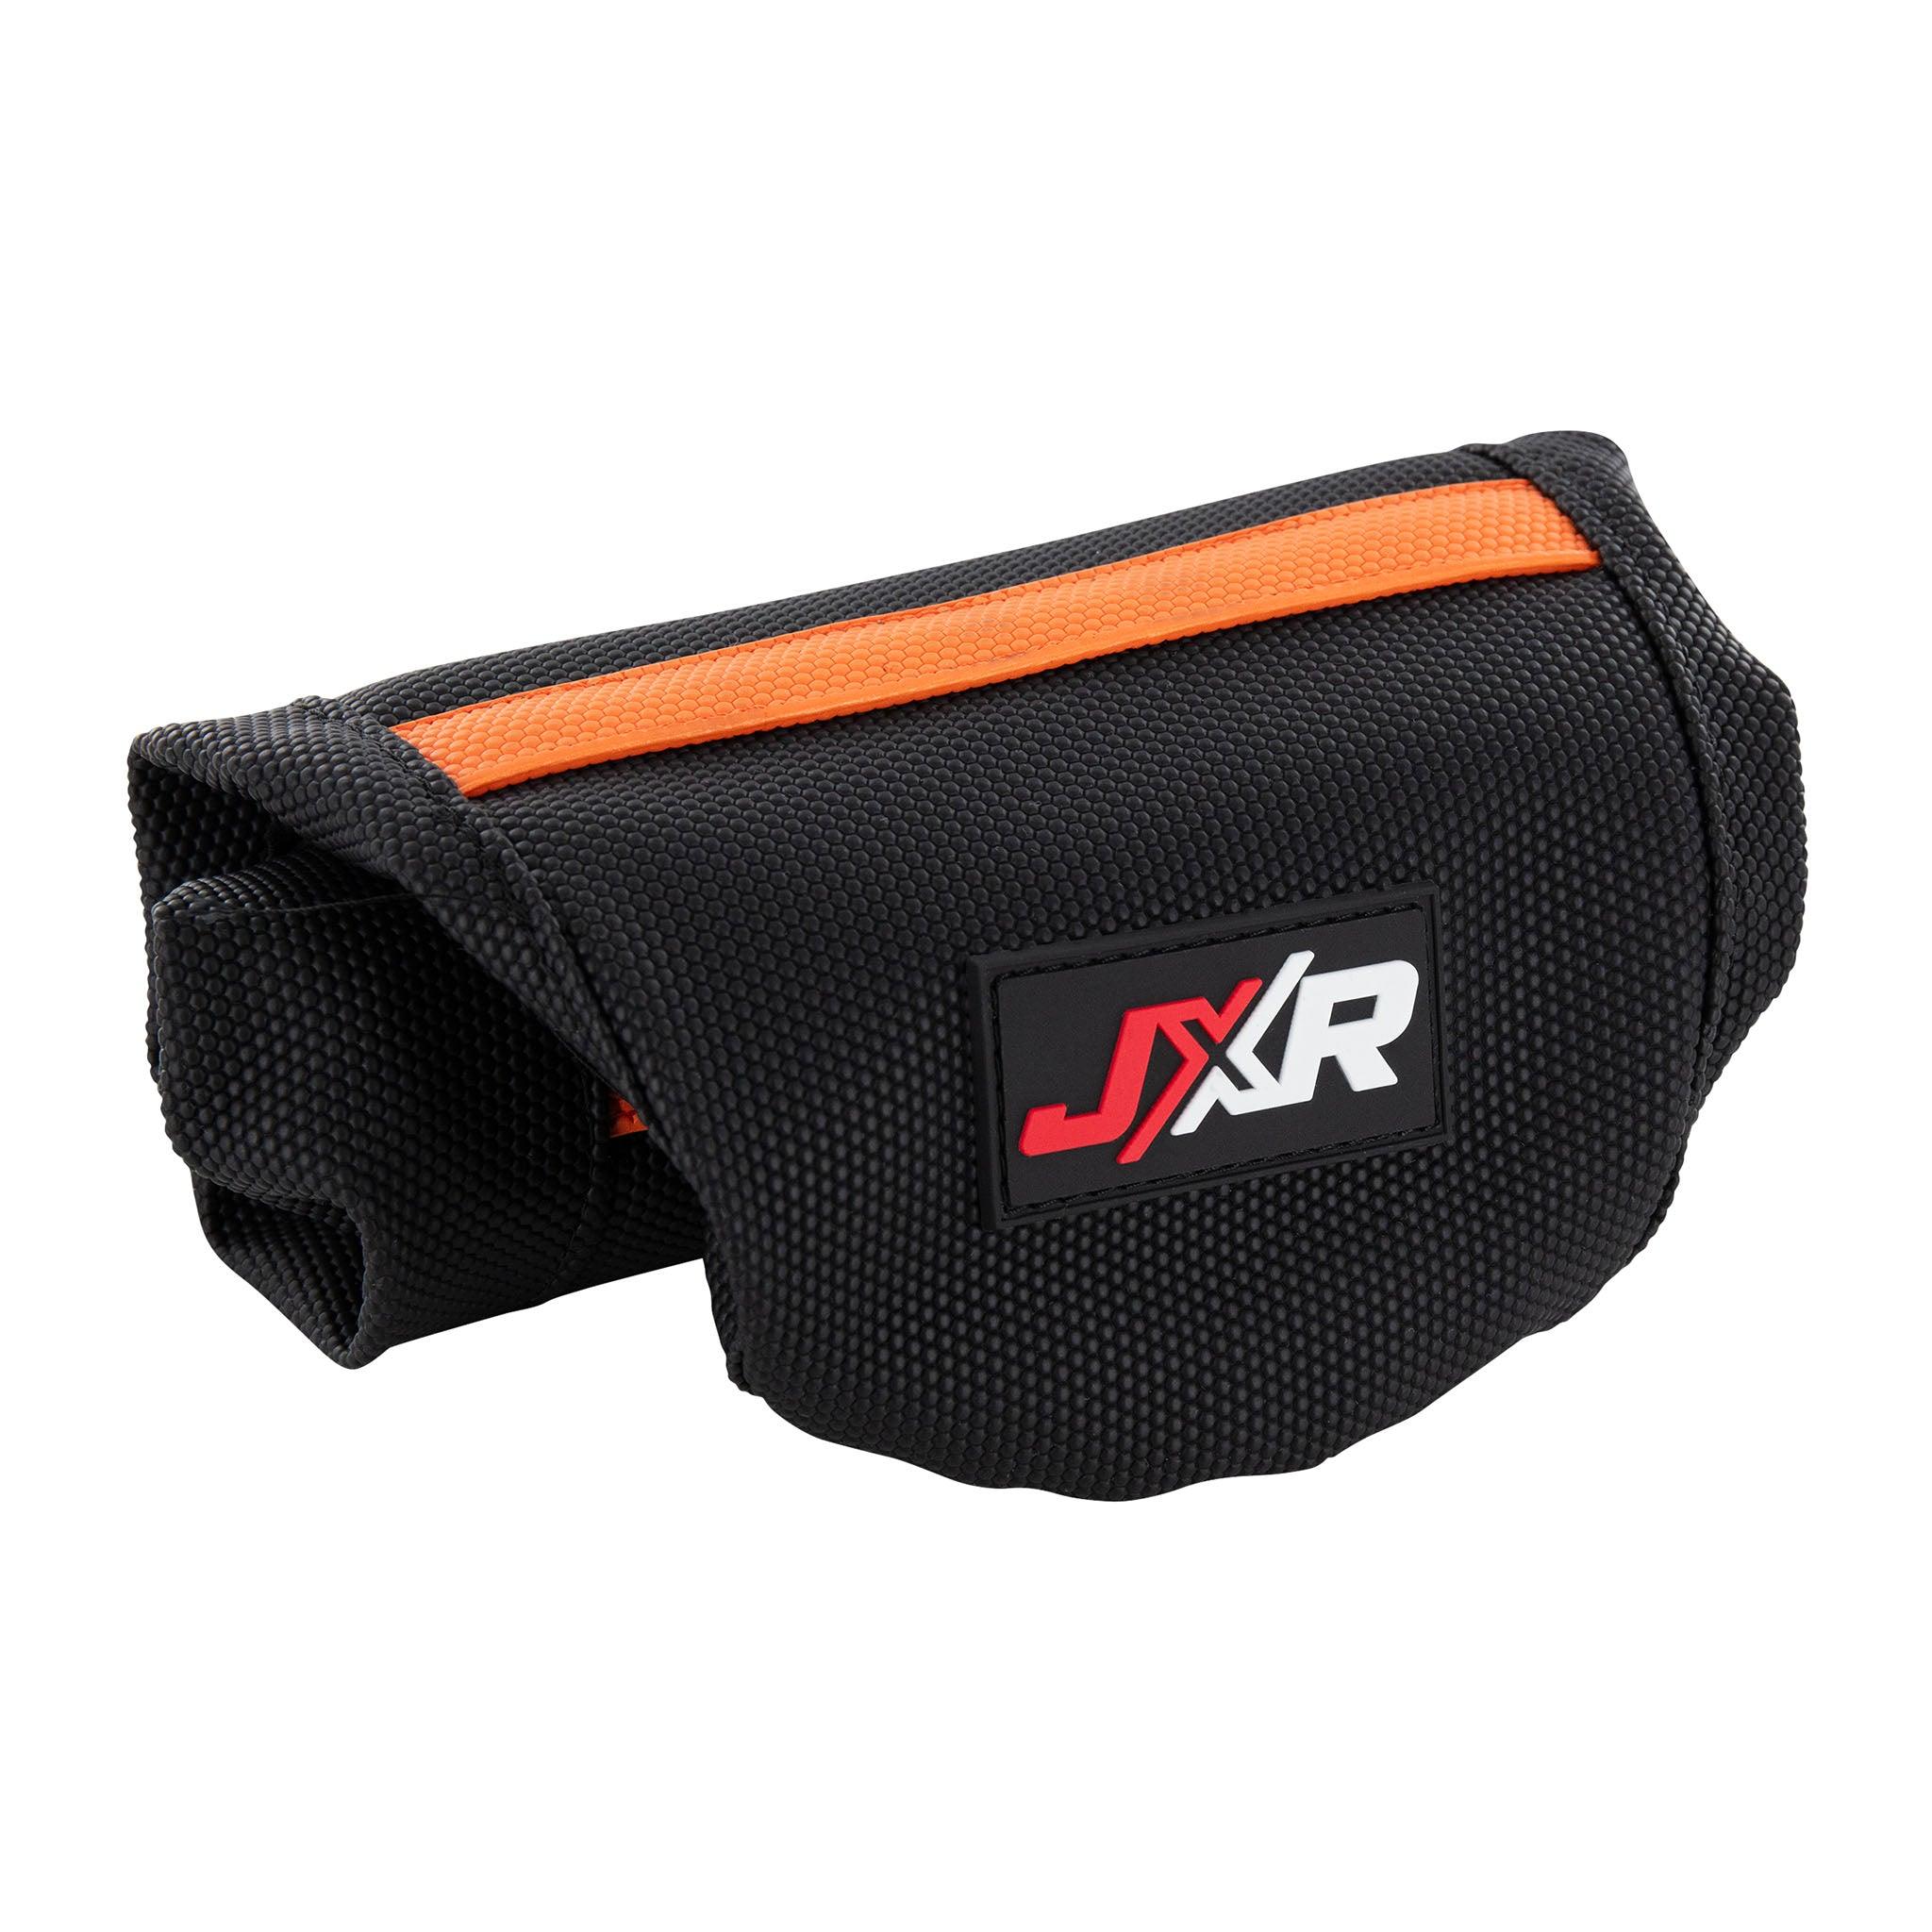 JXR Seat Cover to fit Surron Light Bee